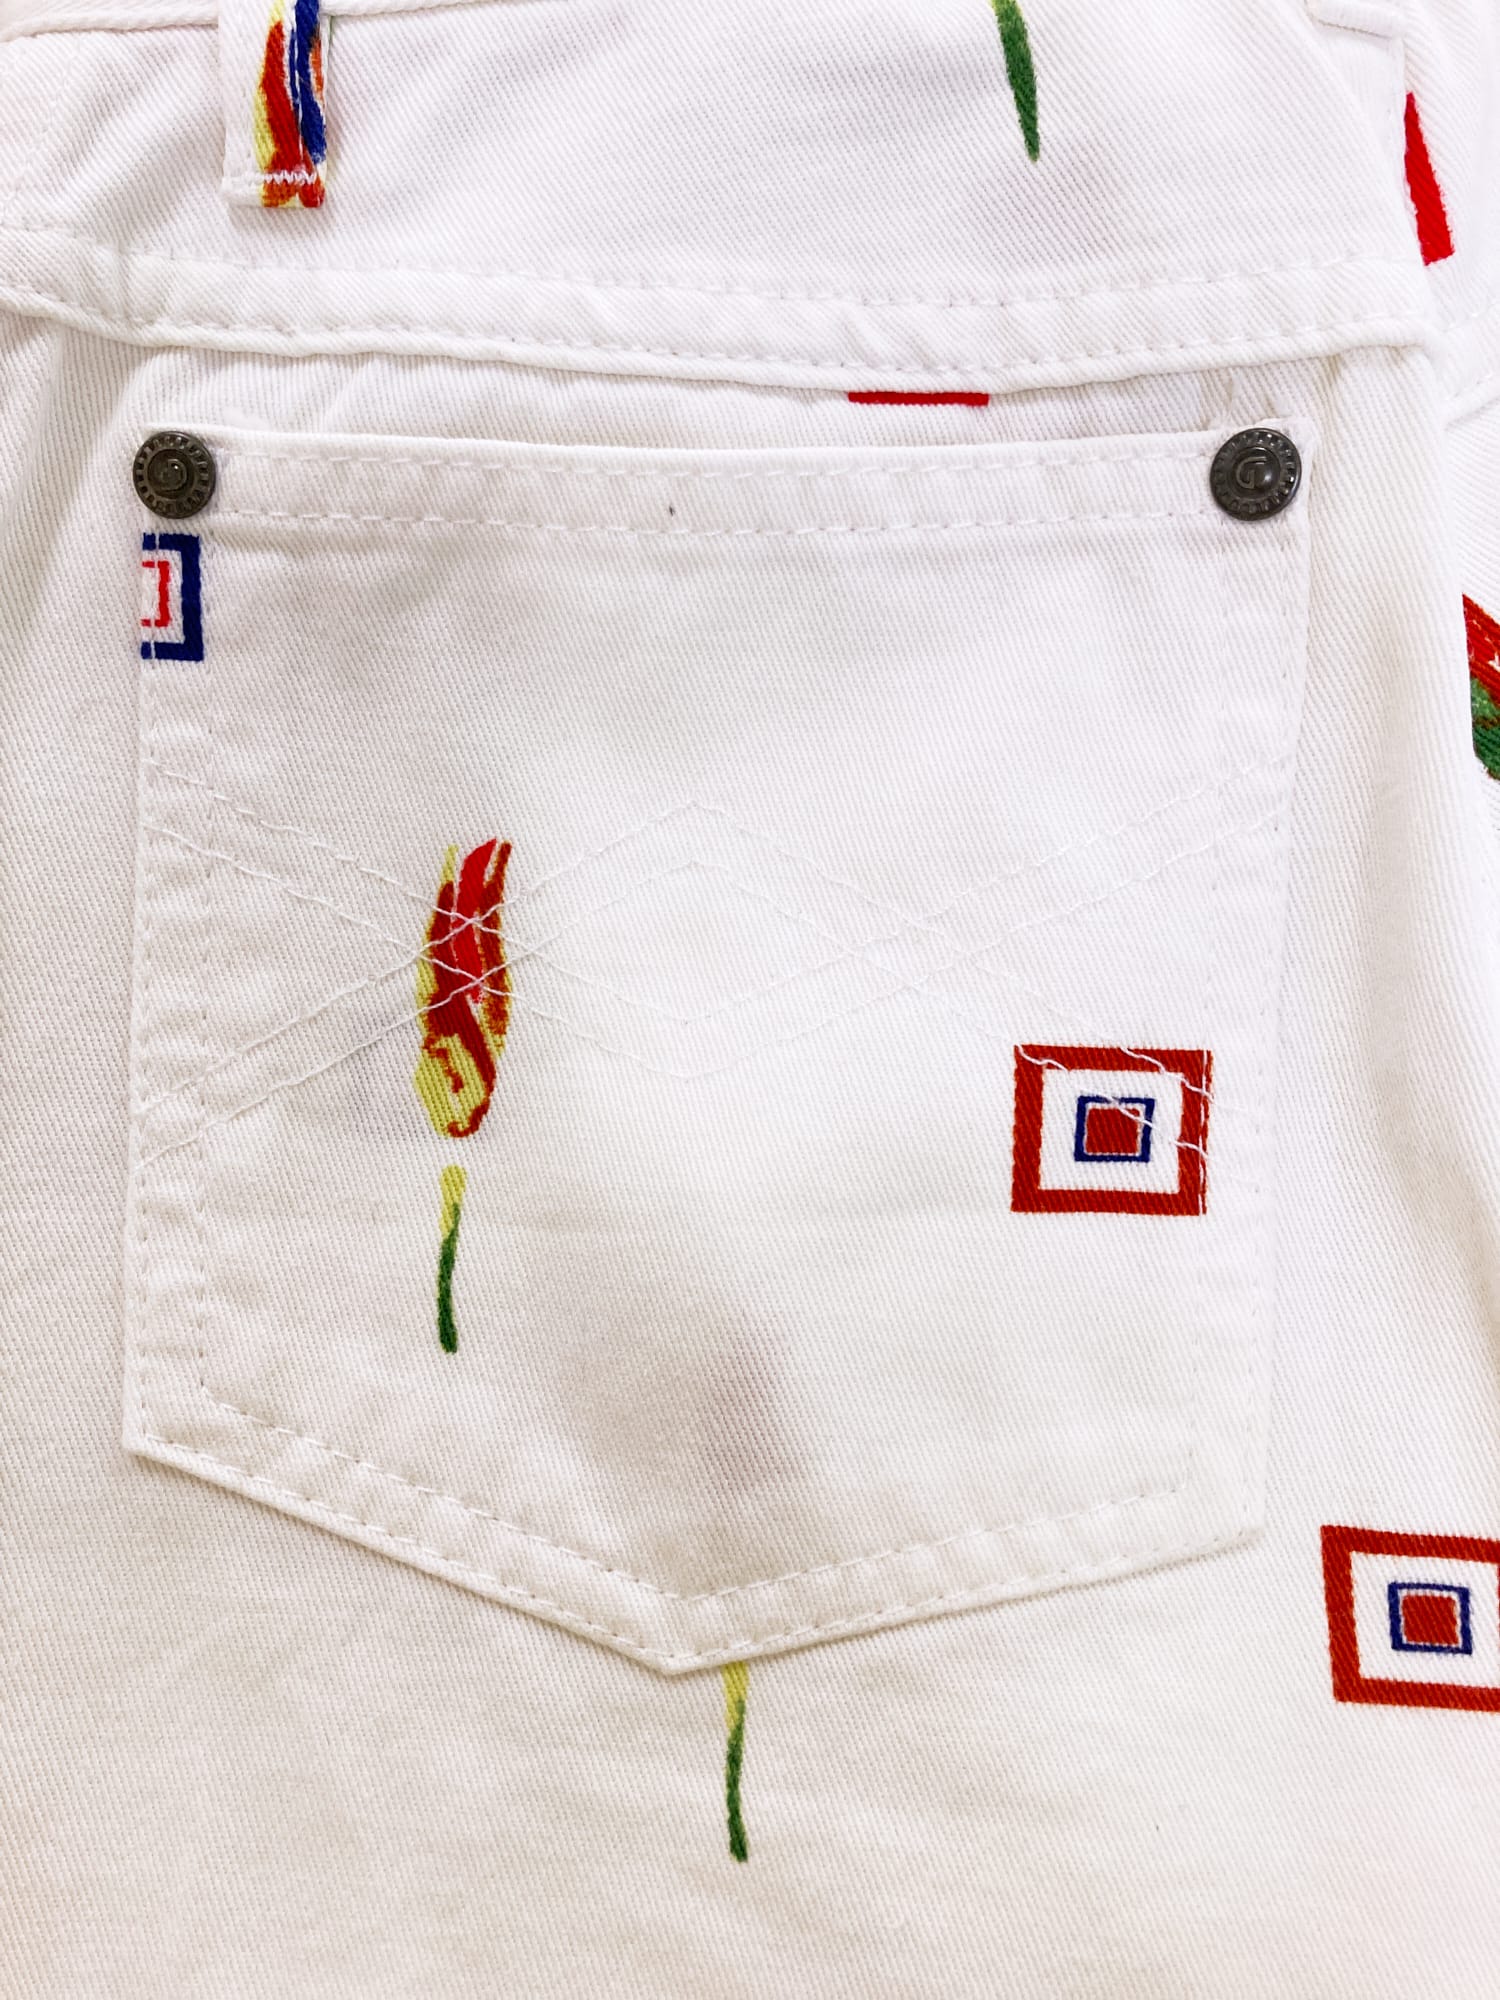 Byblos Blu 1990s white denim jeans with red floral and geometric print